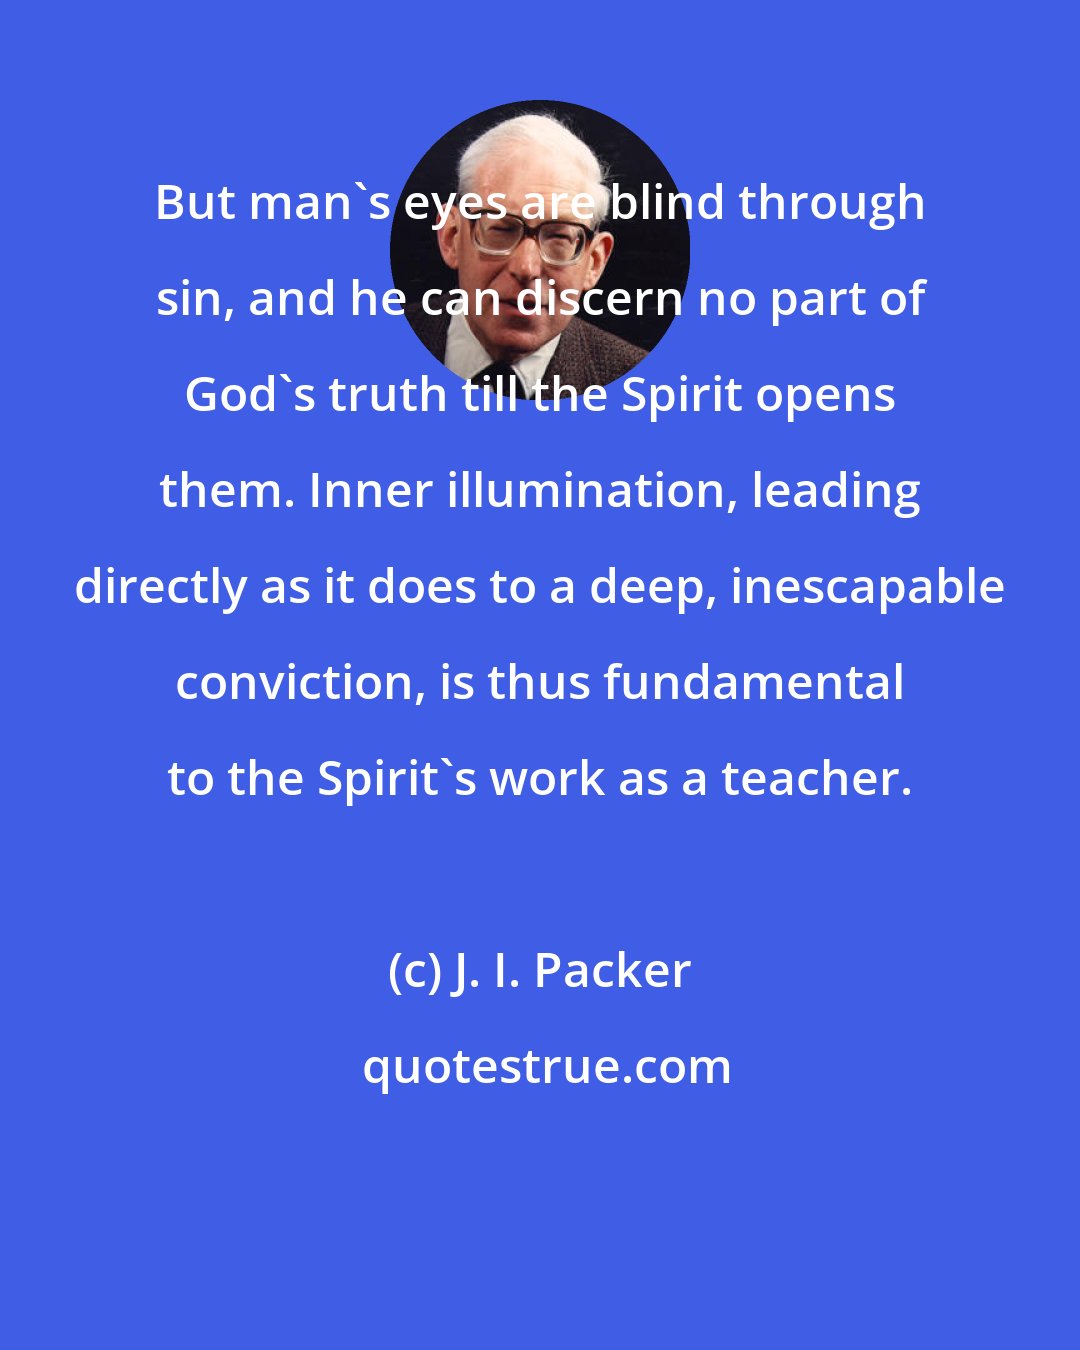 J. I. Packer: But man's eyes are blind through sin, and he can discern no part of God's truth till the Spirit opens them. Inner illumination, leading directly as it does to a deep, inescapable conviction, is thus fundamental to the Spirit's work as a teacher.